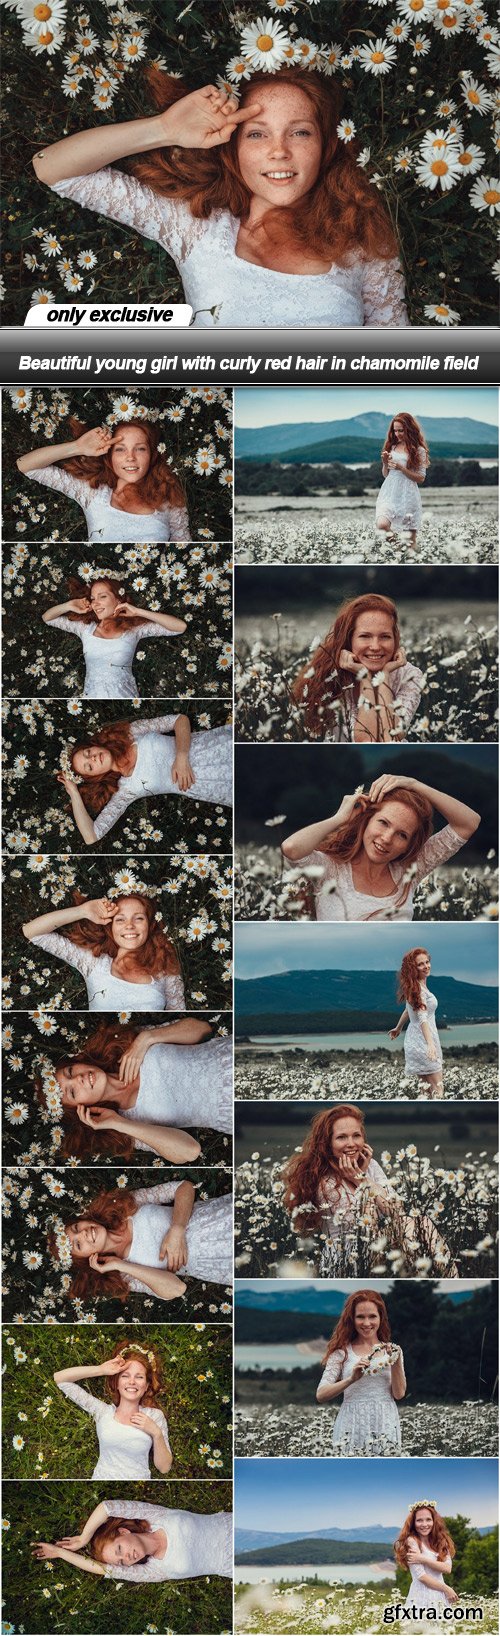 Beautiful young girl with curly red hair in chamomile field - 15 UHQ JPEG